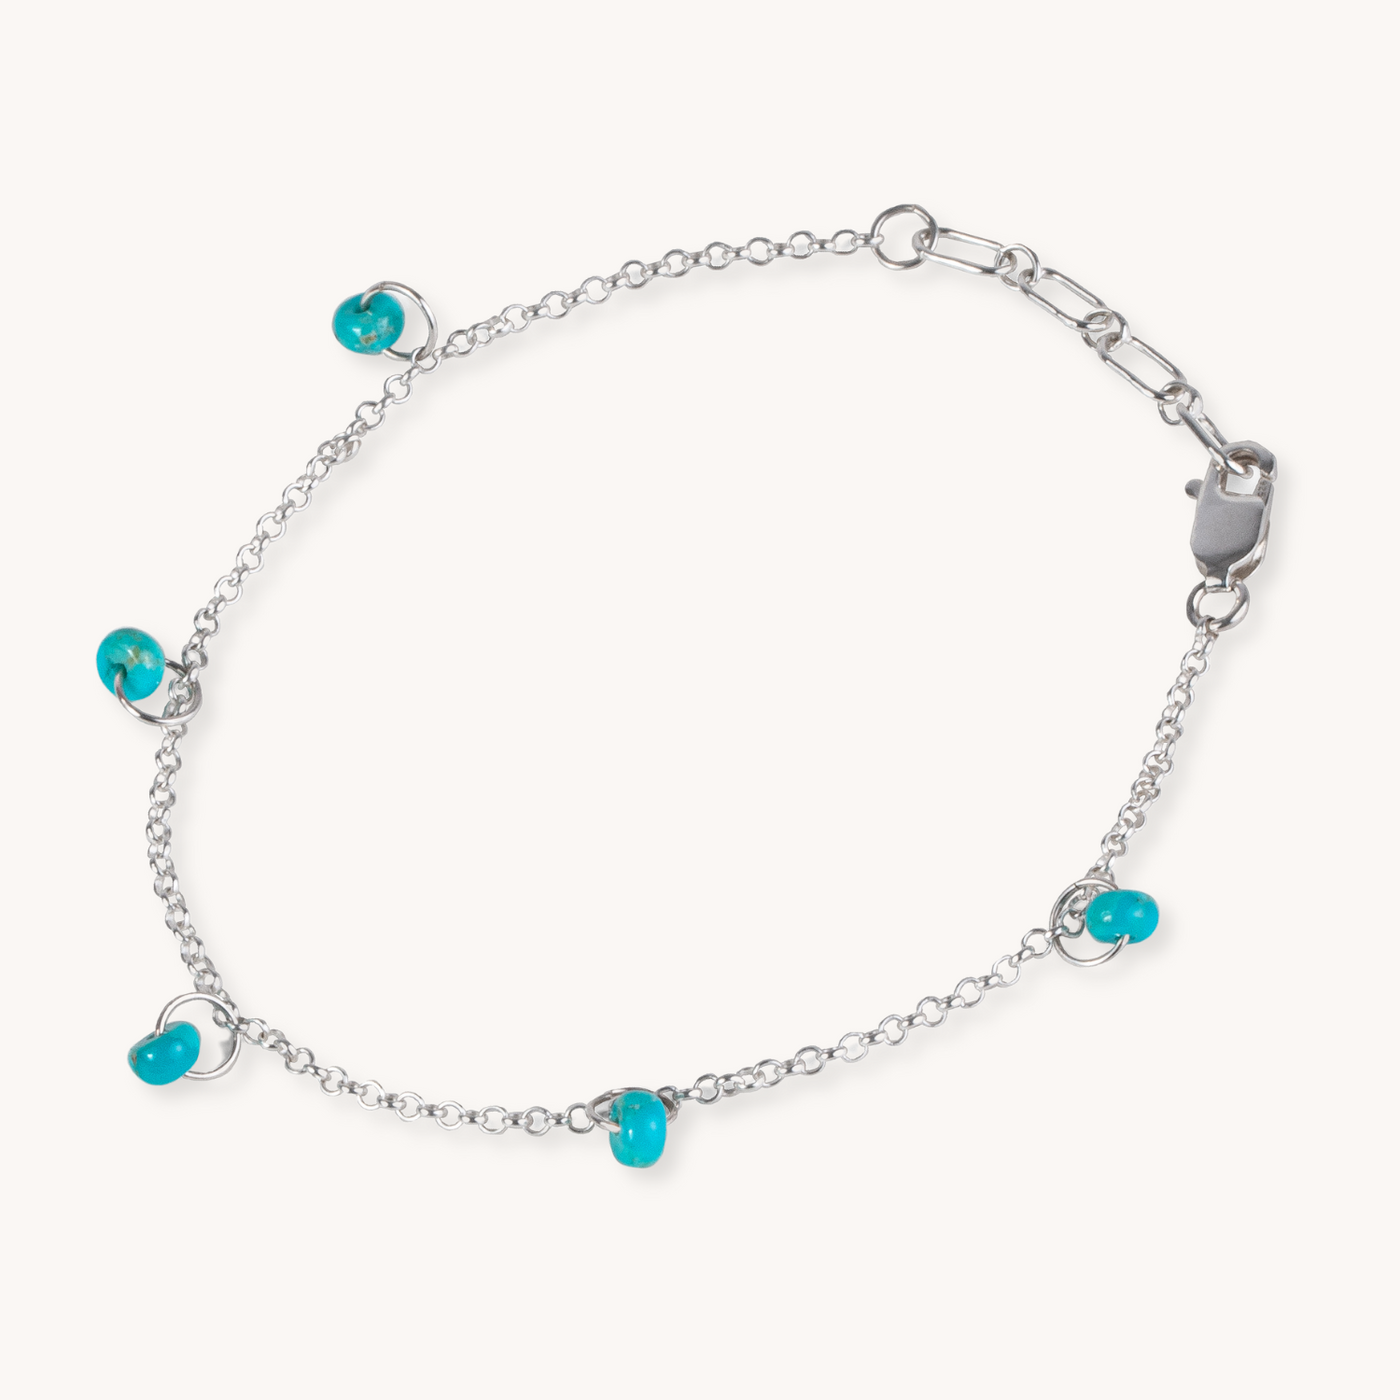 Real Turquoise and Silver Bracelet by TSkies